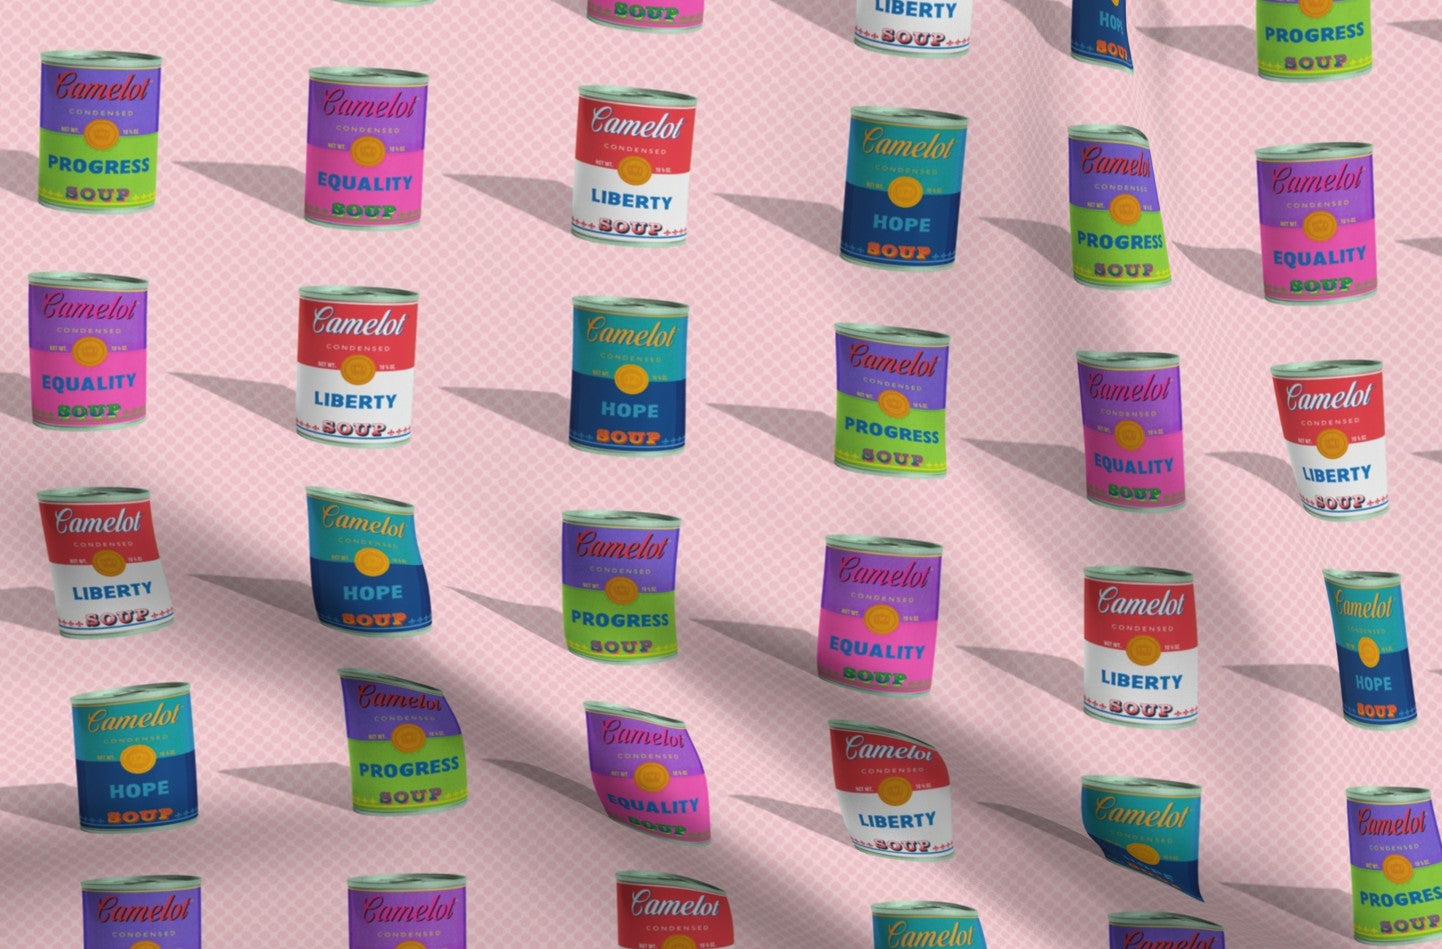 Soup Cans (Cotton Candy) Printed Fabric by Studio Ten Design